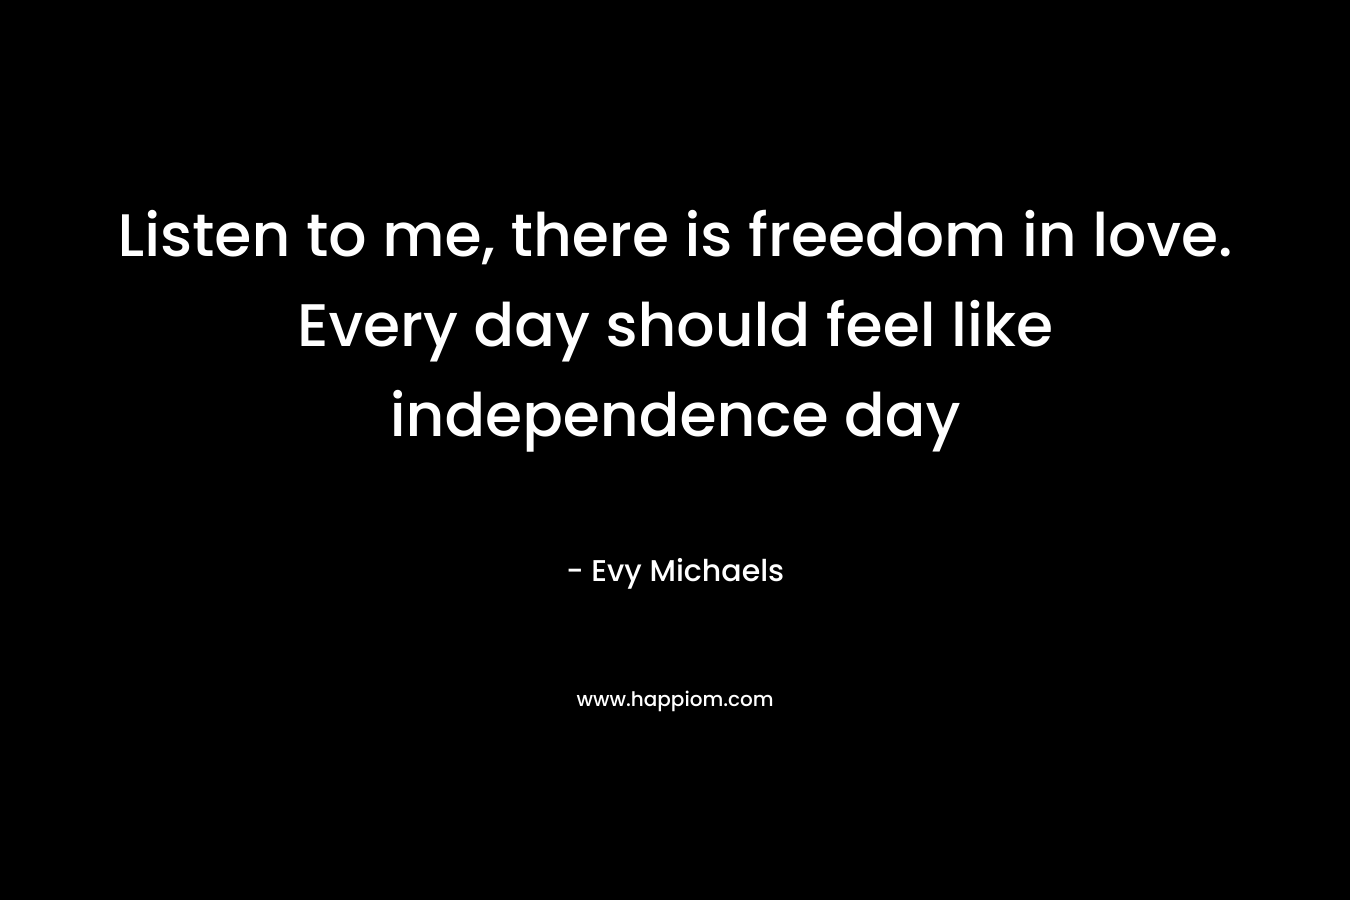 Listen to me, there is freedom in love. Every day should feel like independence day